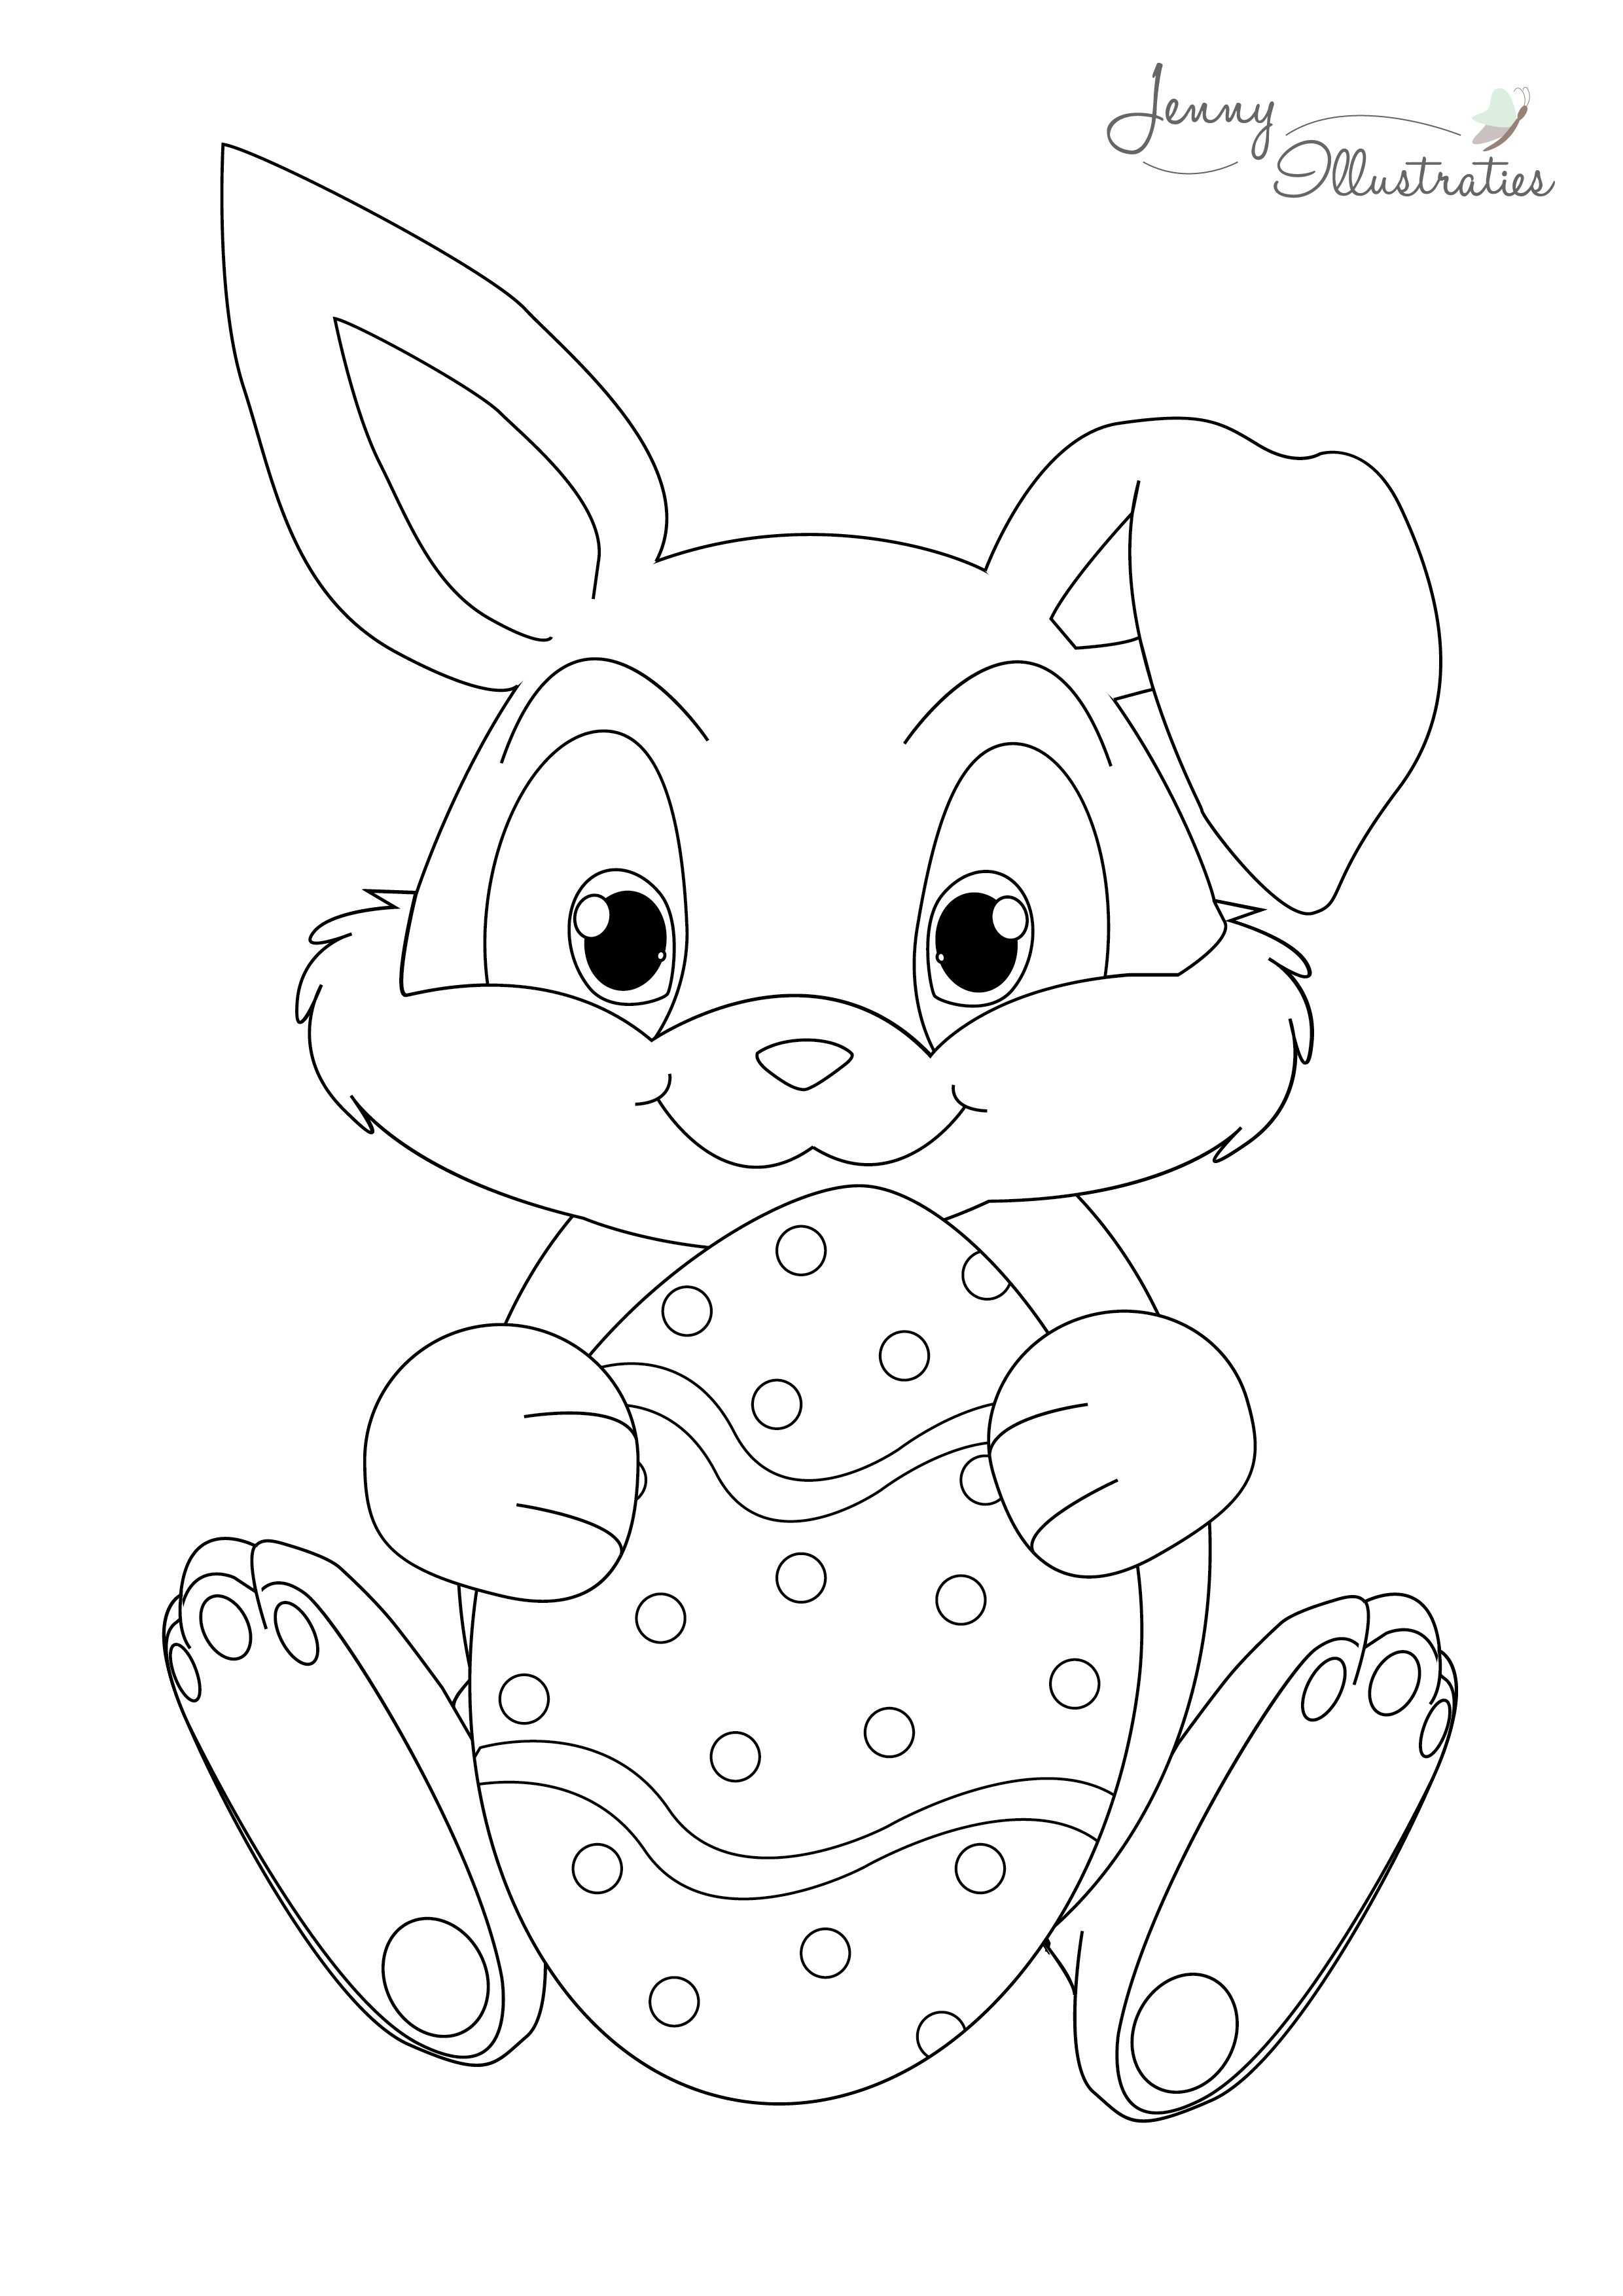 Pin By Heidi Flederick On Thema Pasen Free Coloring Pages Coloring Pages Easter Bunny